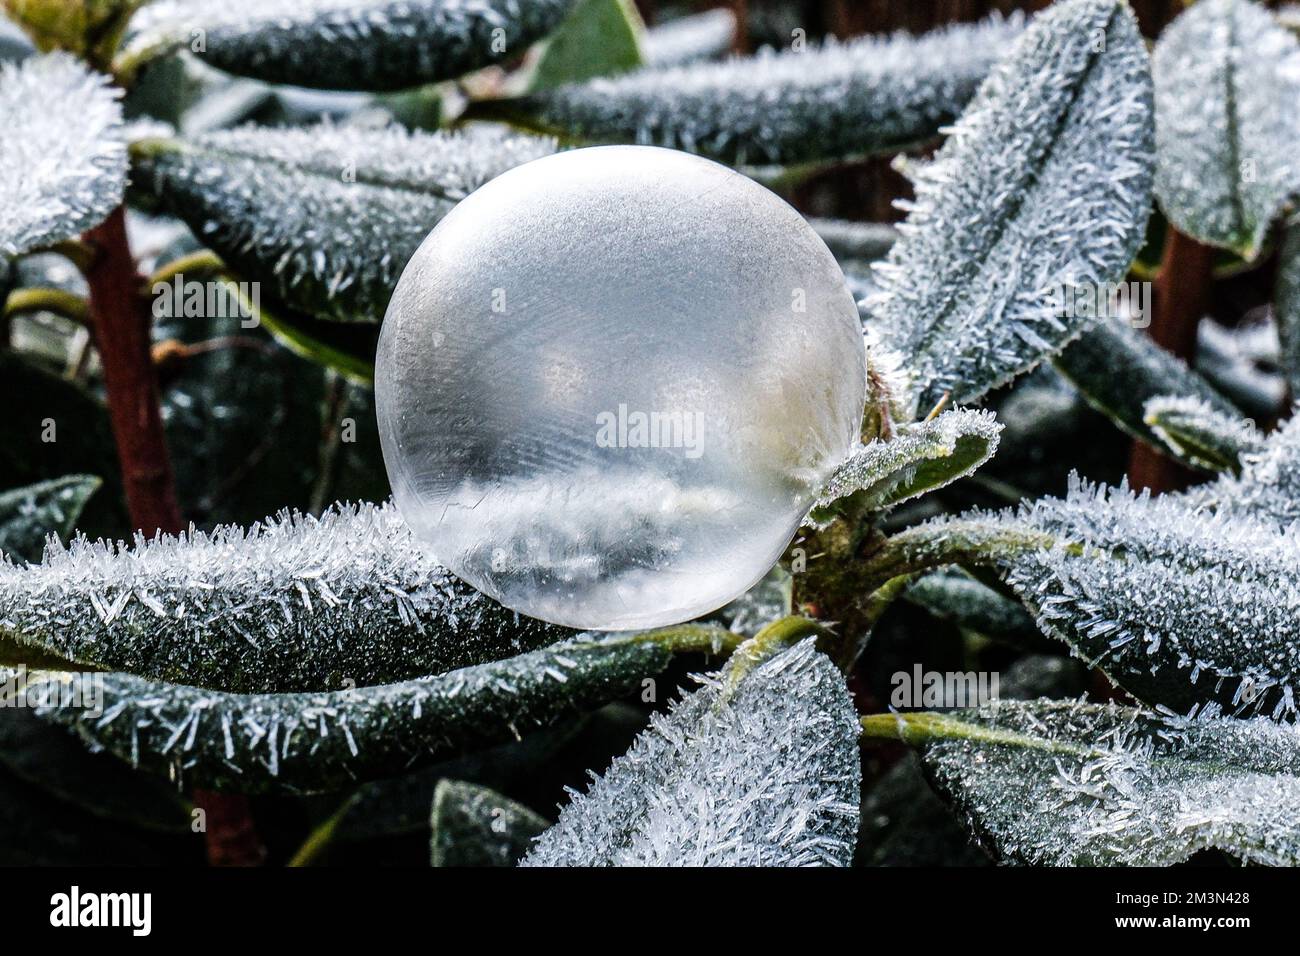 Frozen Ice bubble blown onto plant leaves and flowers Stock Photo